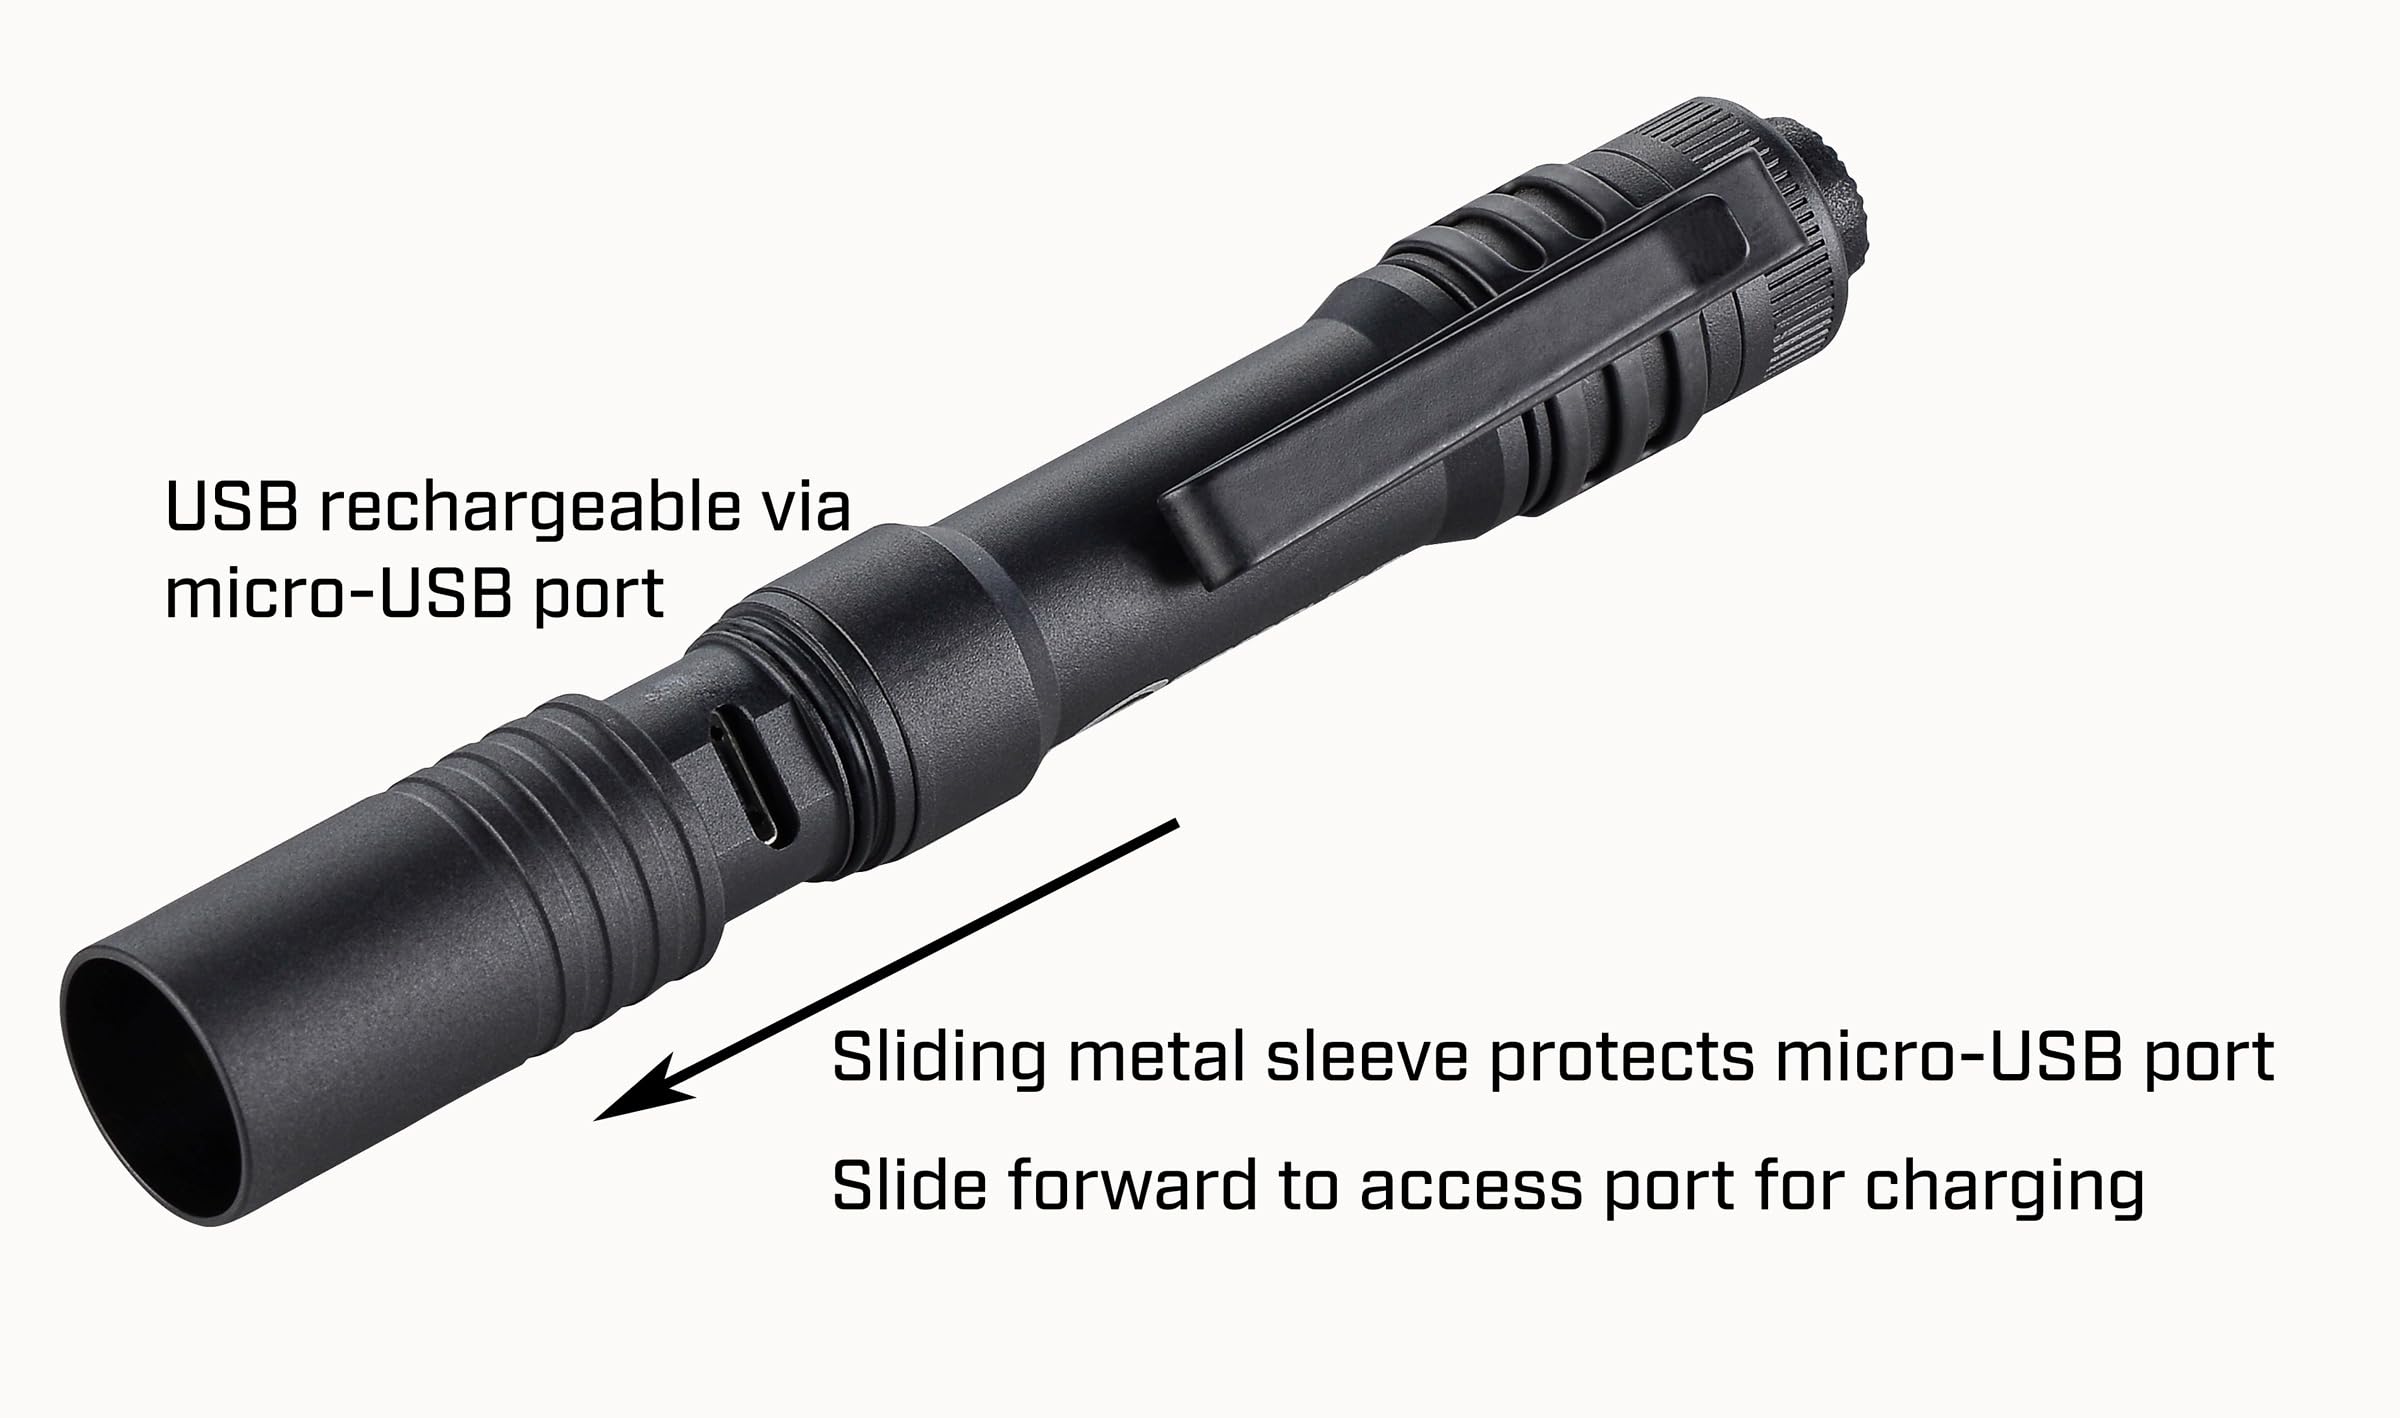 Streamlight 66604 MicroStream 250-Lumen EDC Ultra-Compact Flashlight with USB Rechargeable Battery, Box Packaged, Black